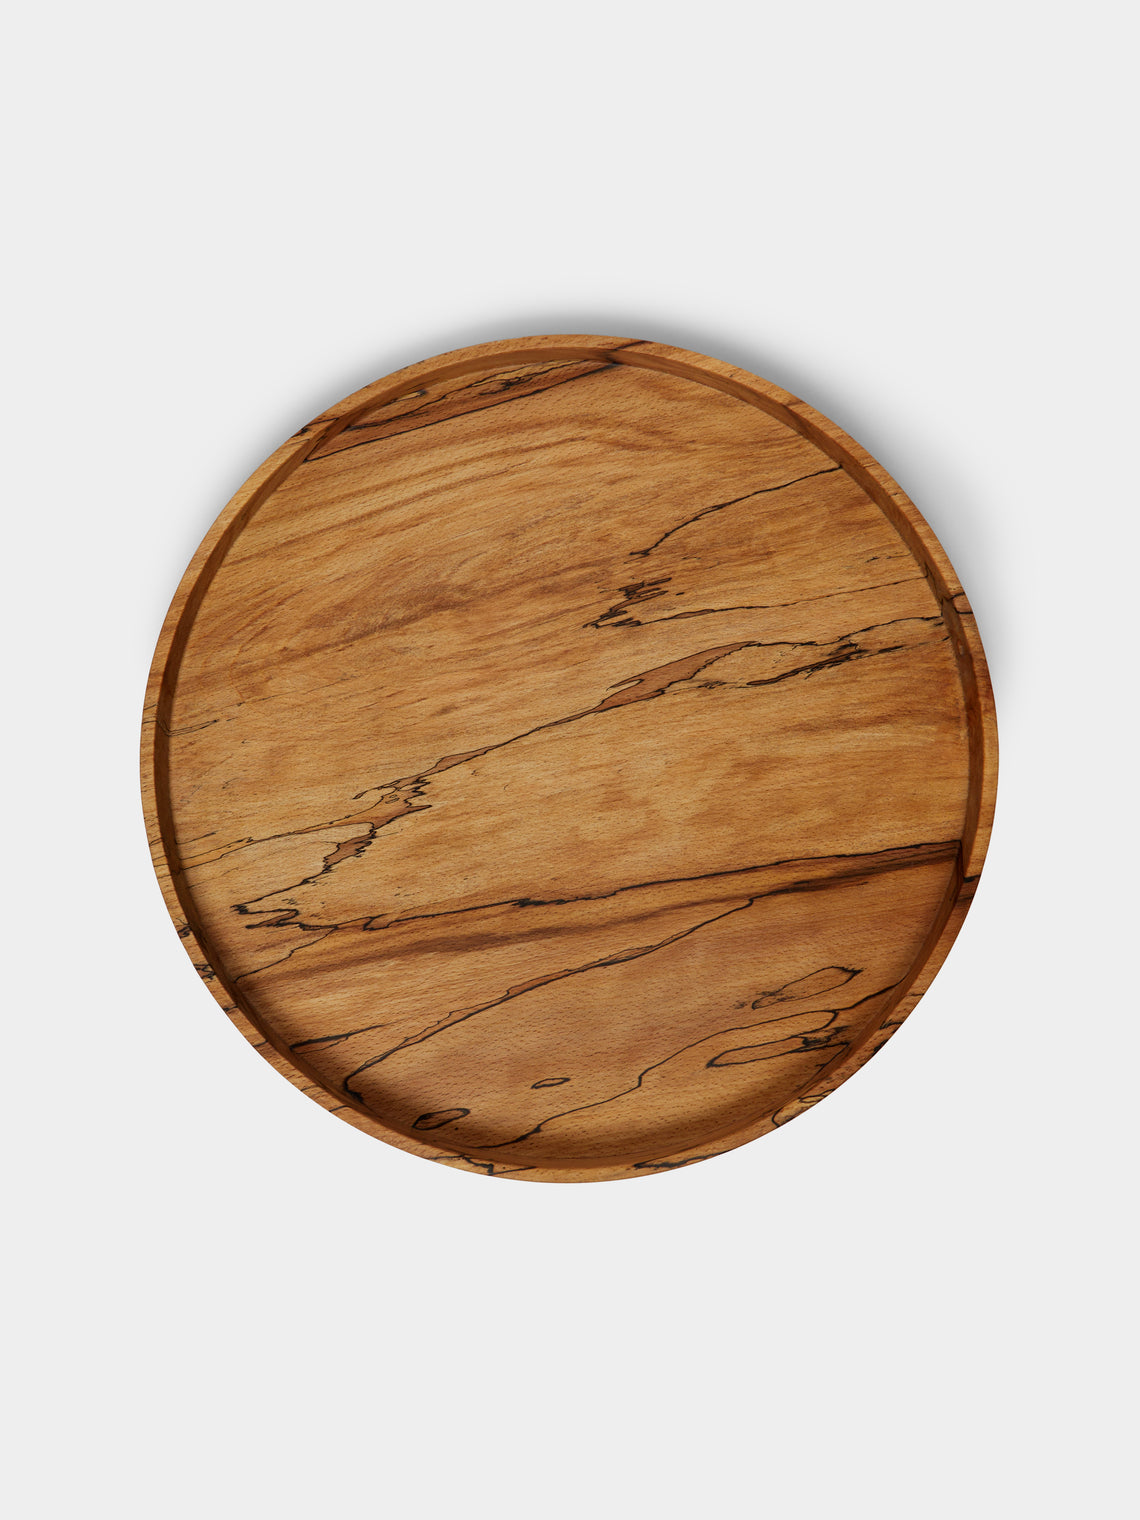 Bird & Branch - Hand-Turned Patterned Beech Service Tray -  - ABASK - 